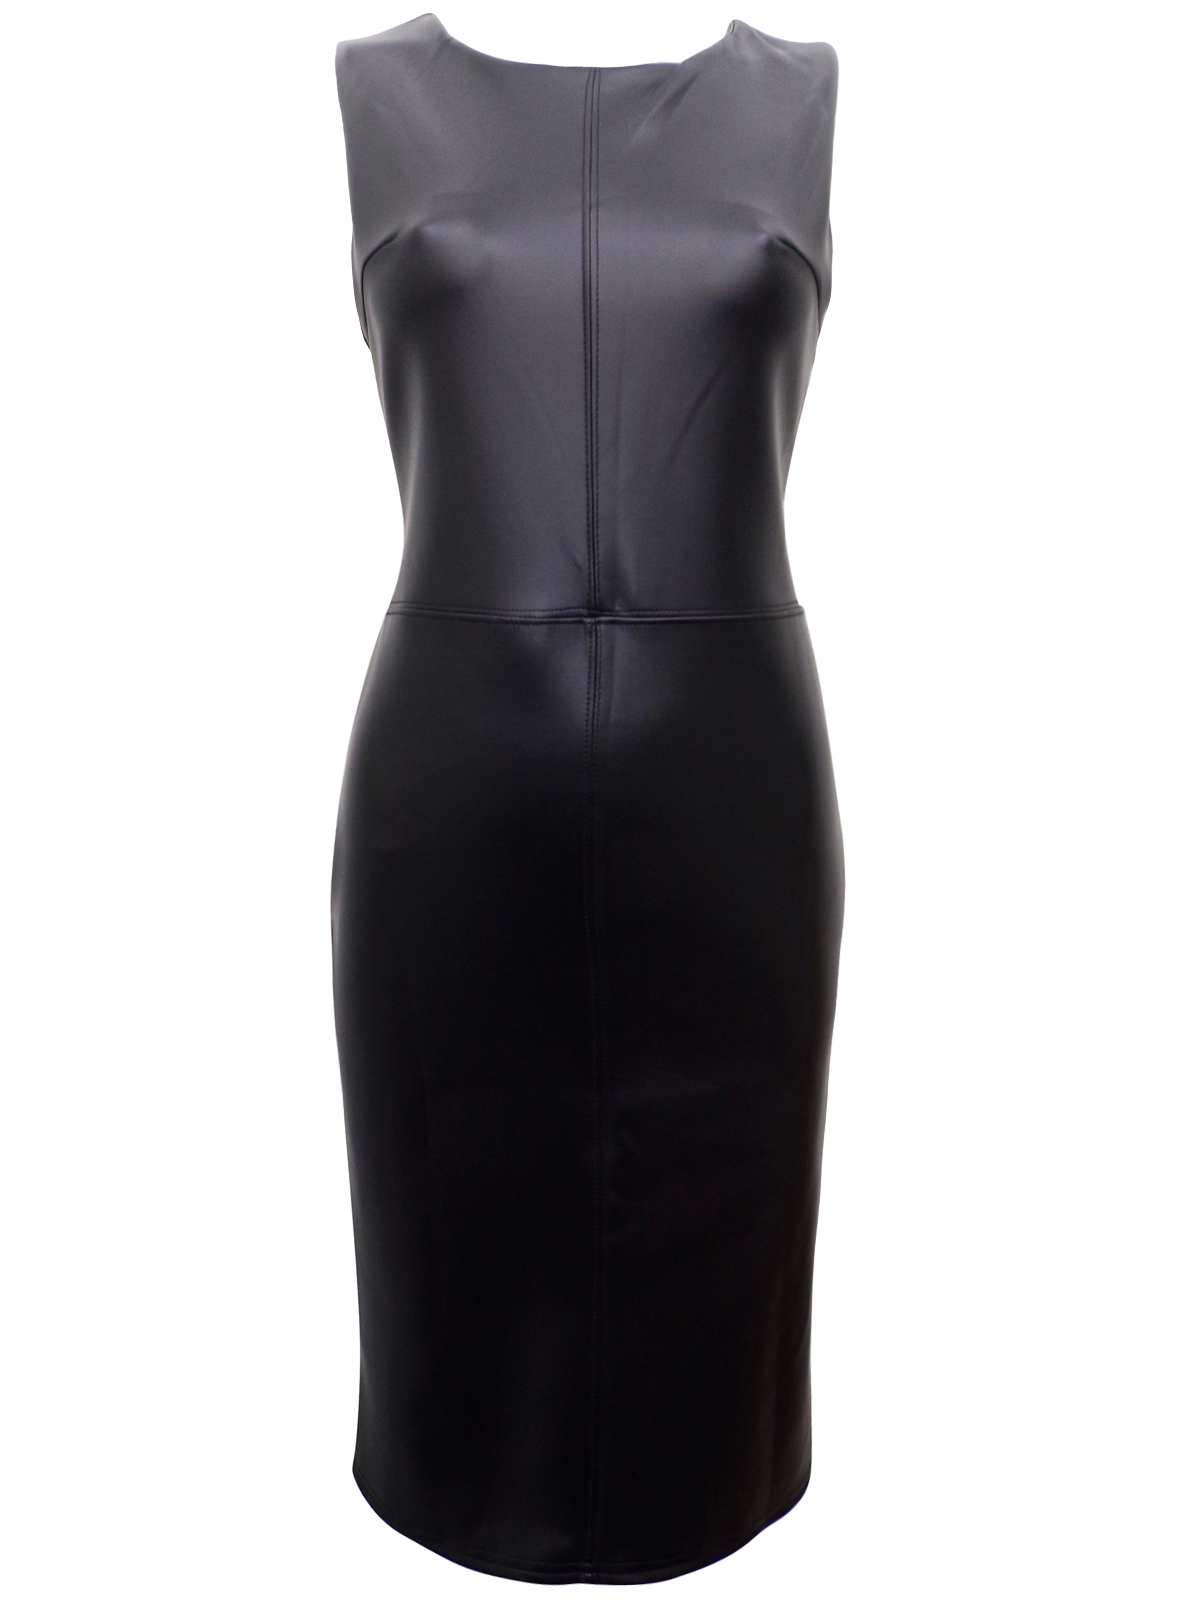 BLACK Faux Leather Panelled Shift Dress - Size 8 to 14